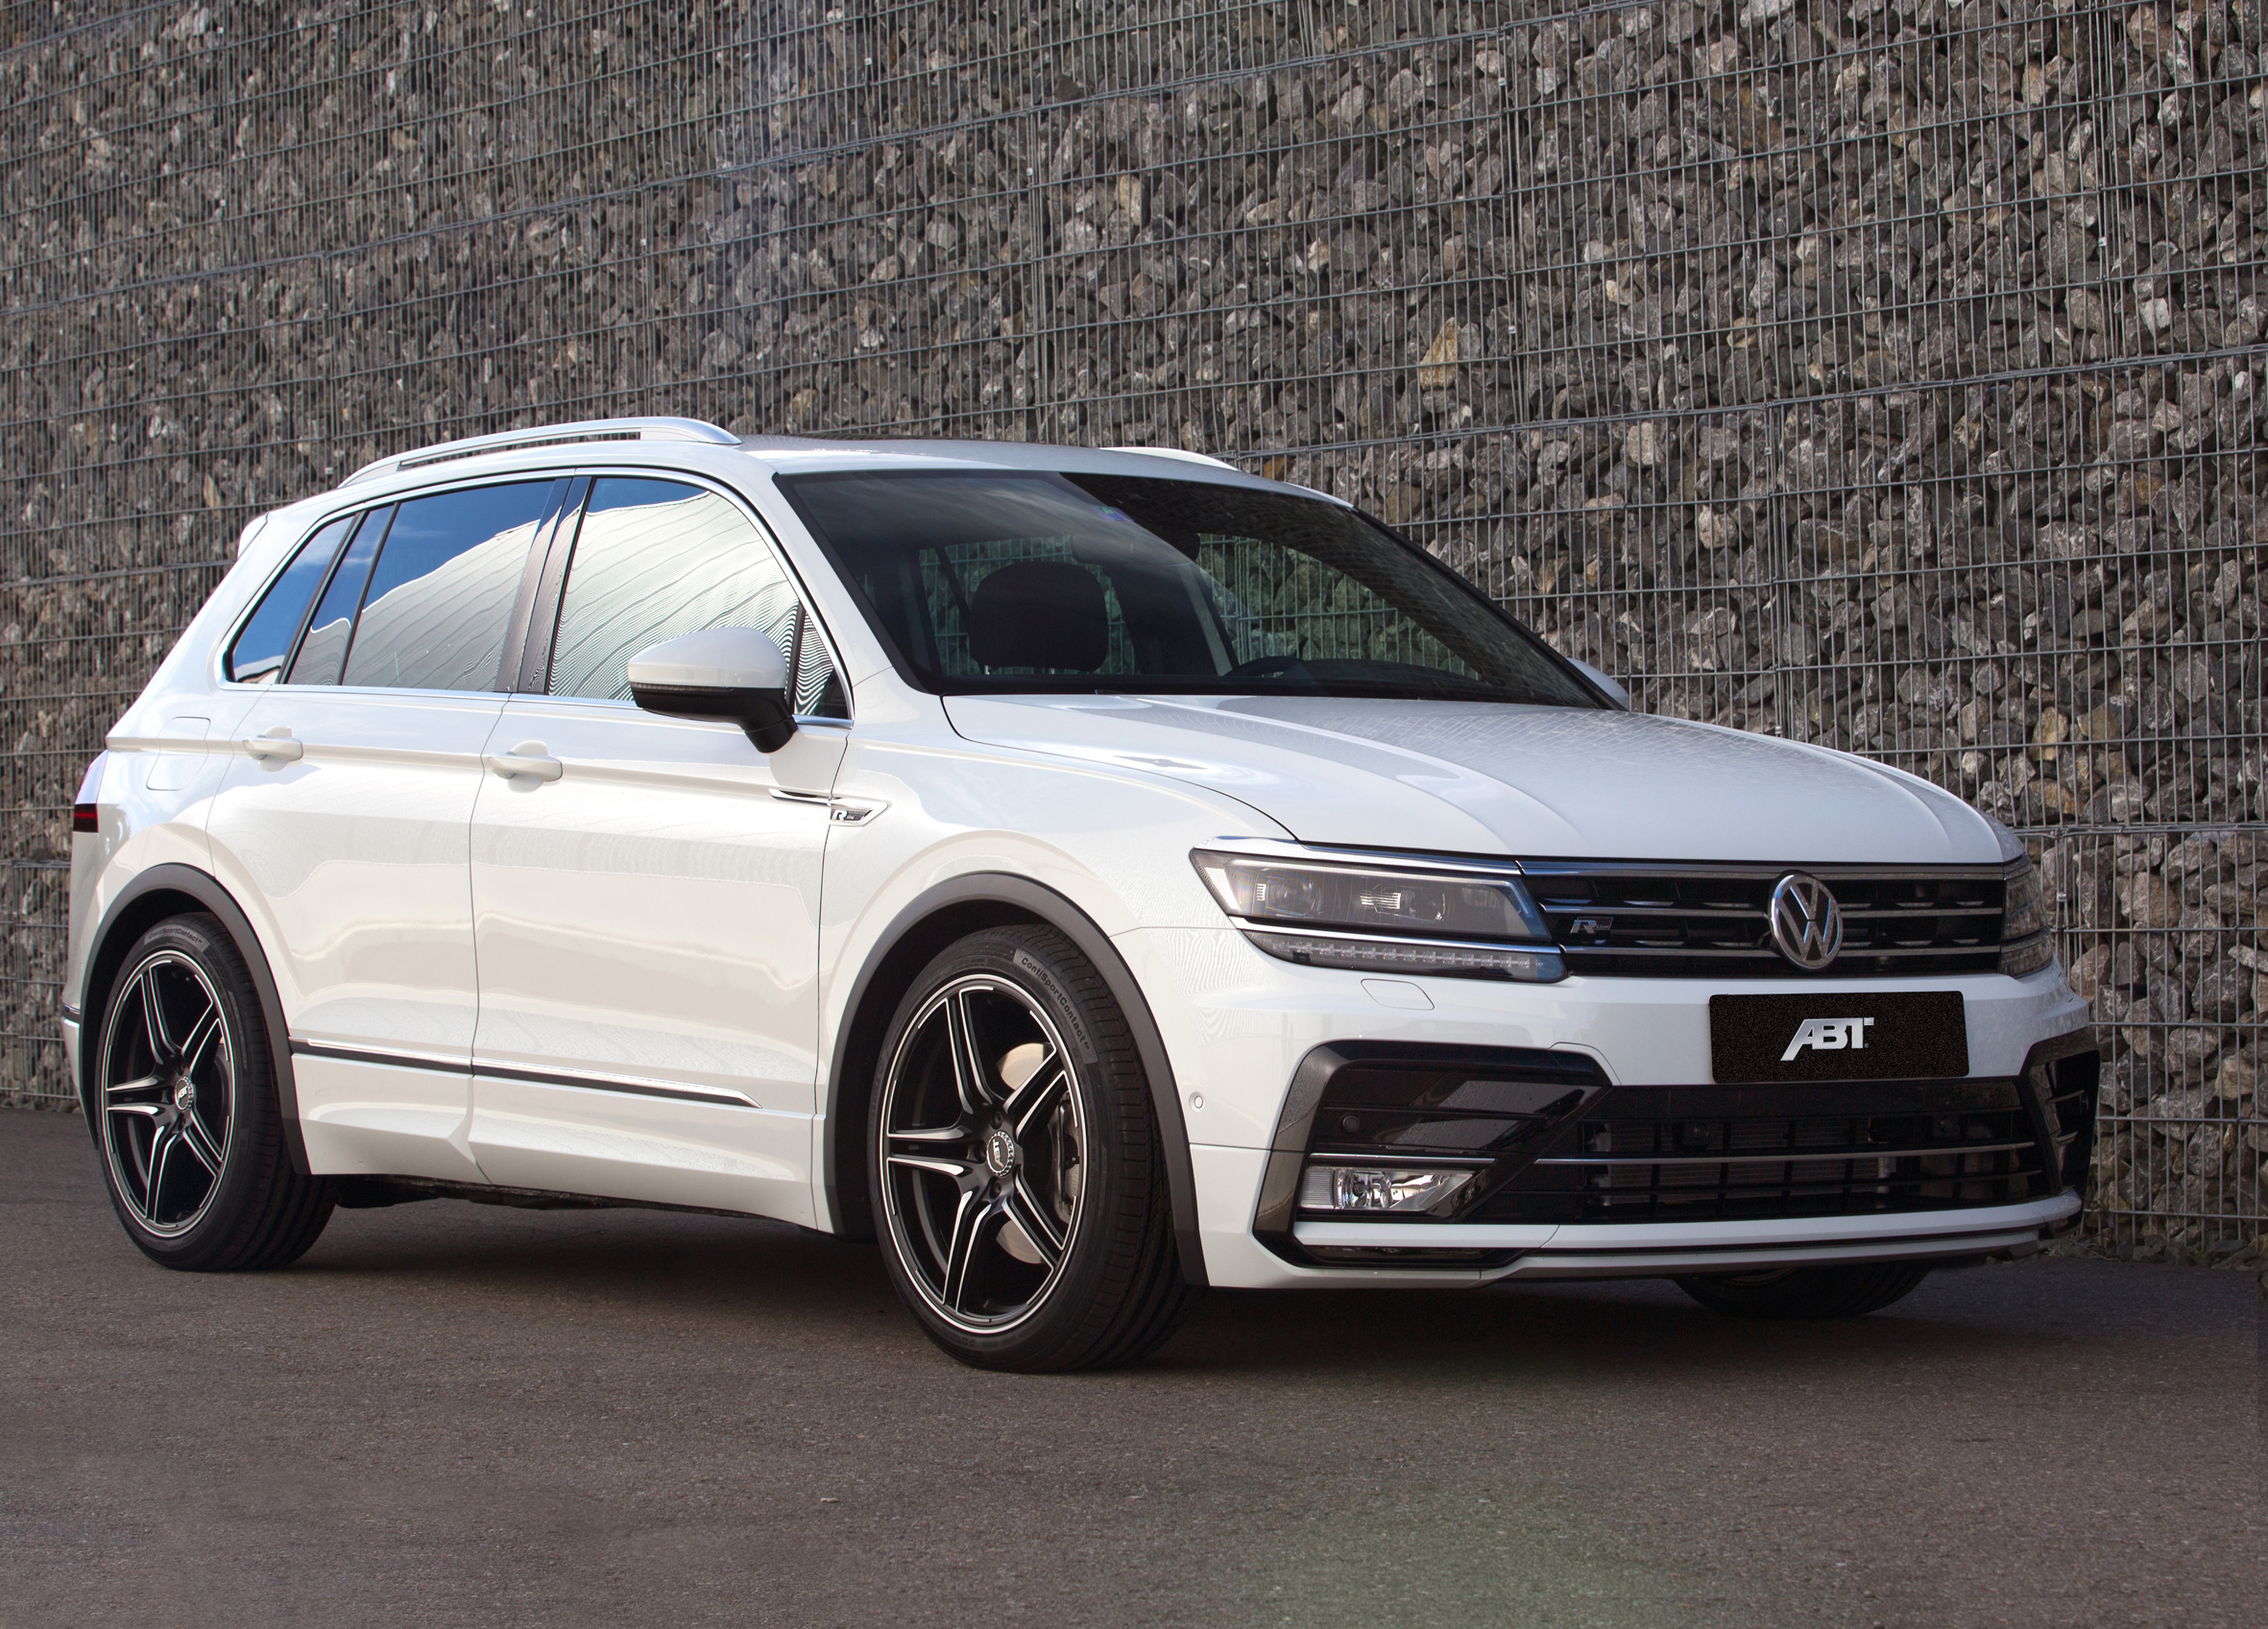 More ABT POWER for the new VW Tiguan - Audi Tuning, VW Tuning, Chiptuning  von ABT Sportsline.